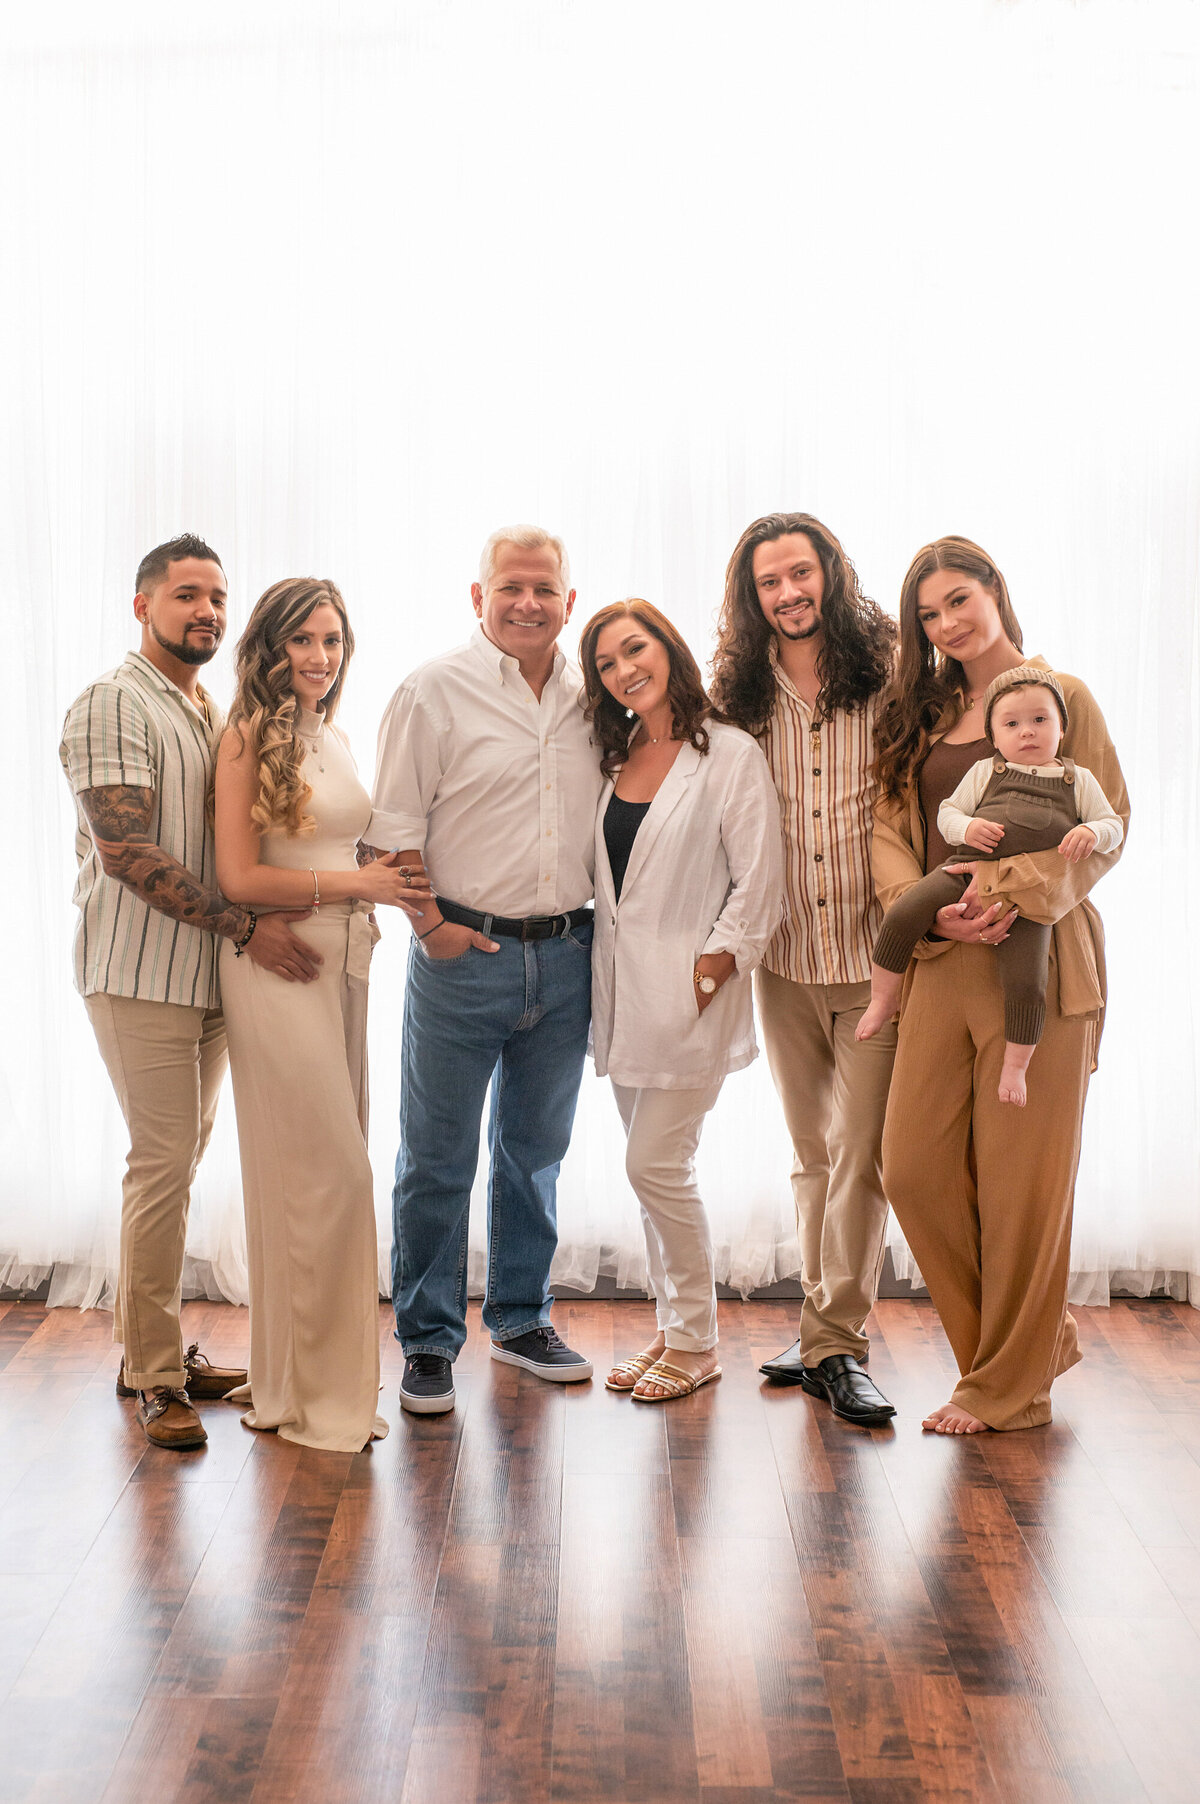 An extended family poses standing in our bright and airy Waukesha photo studio wearing various neutrals.